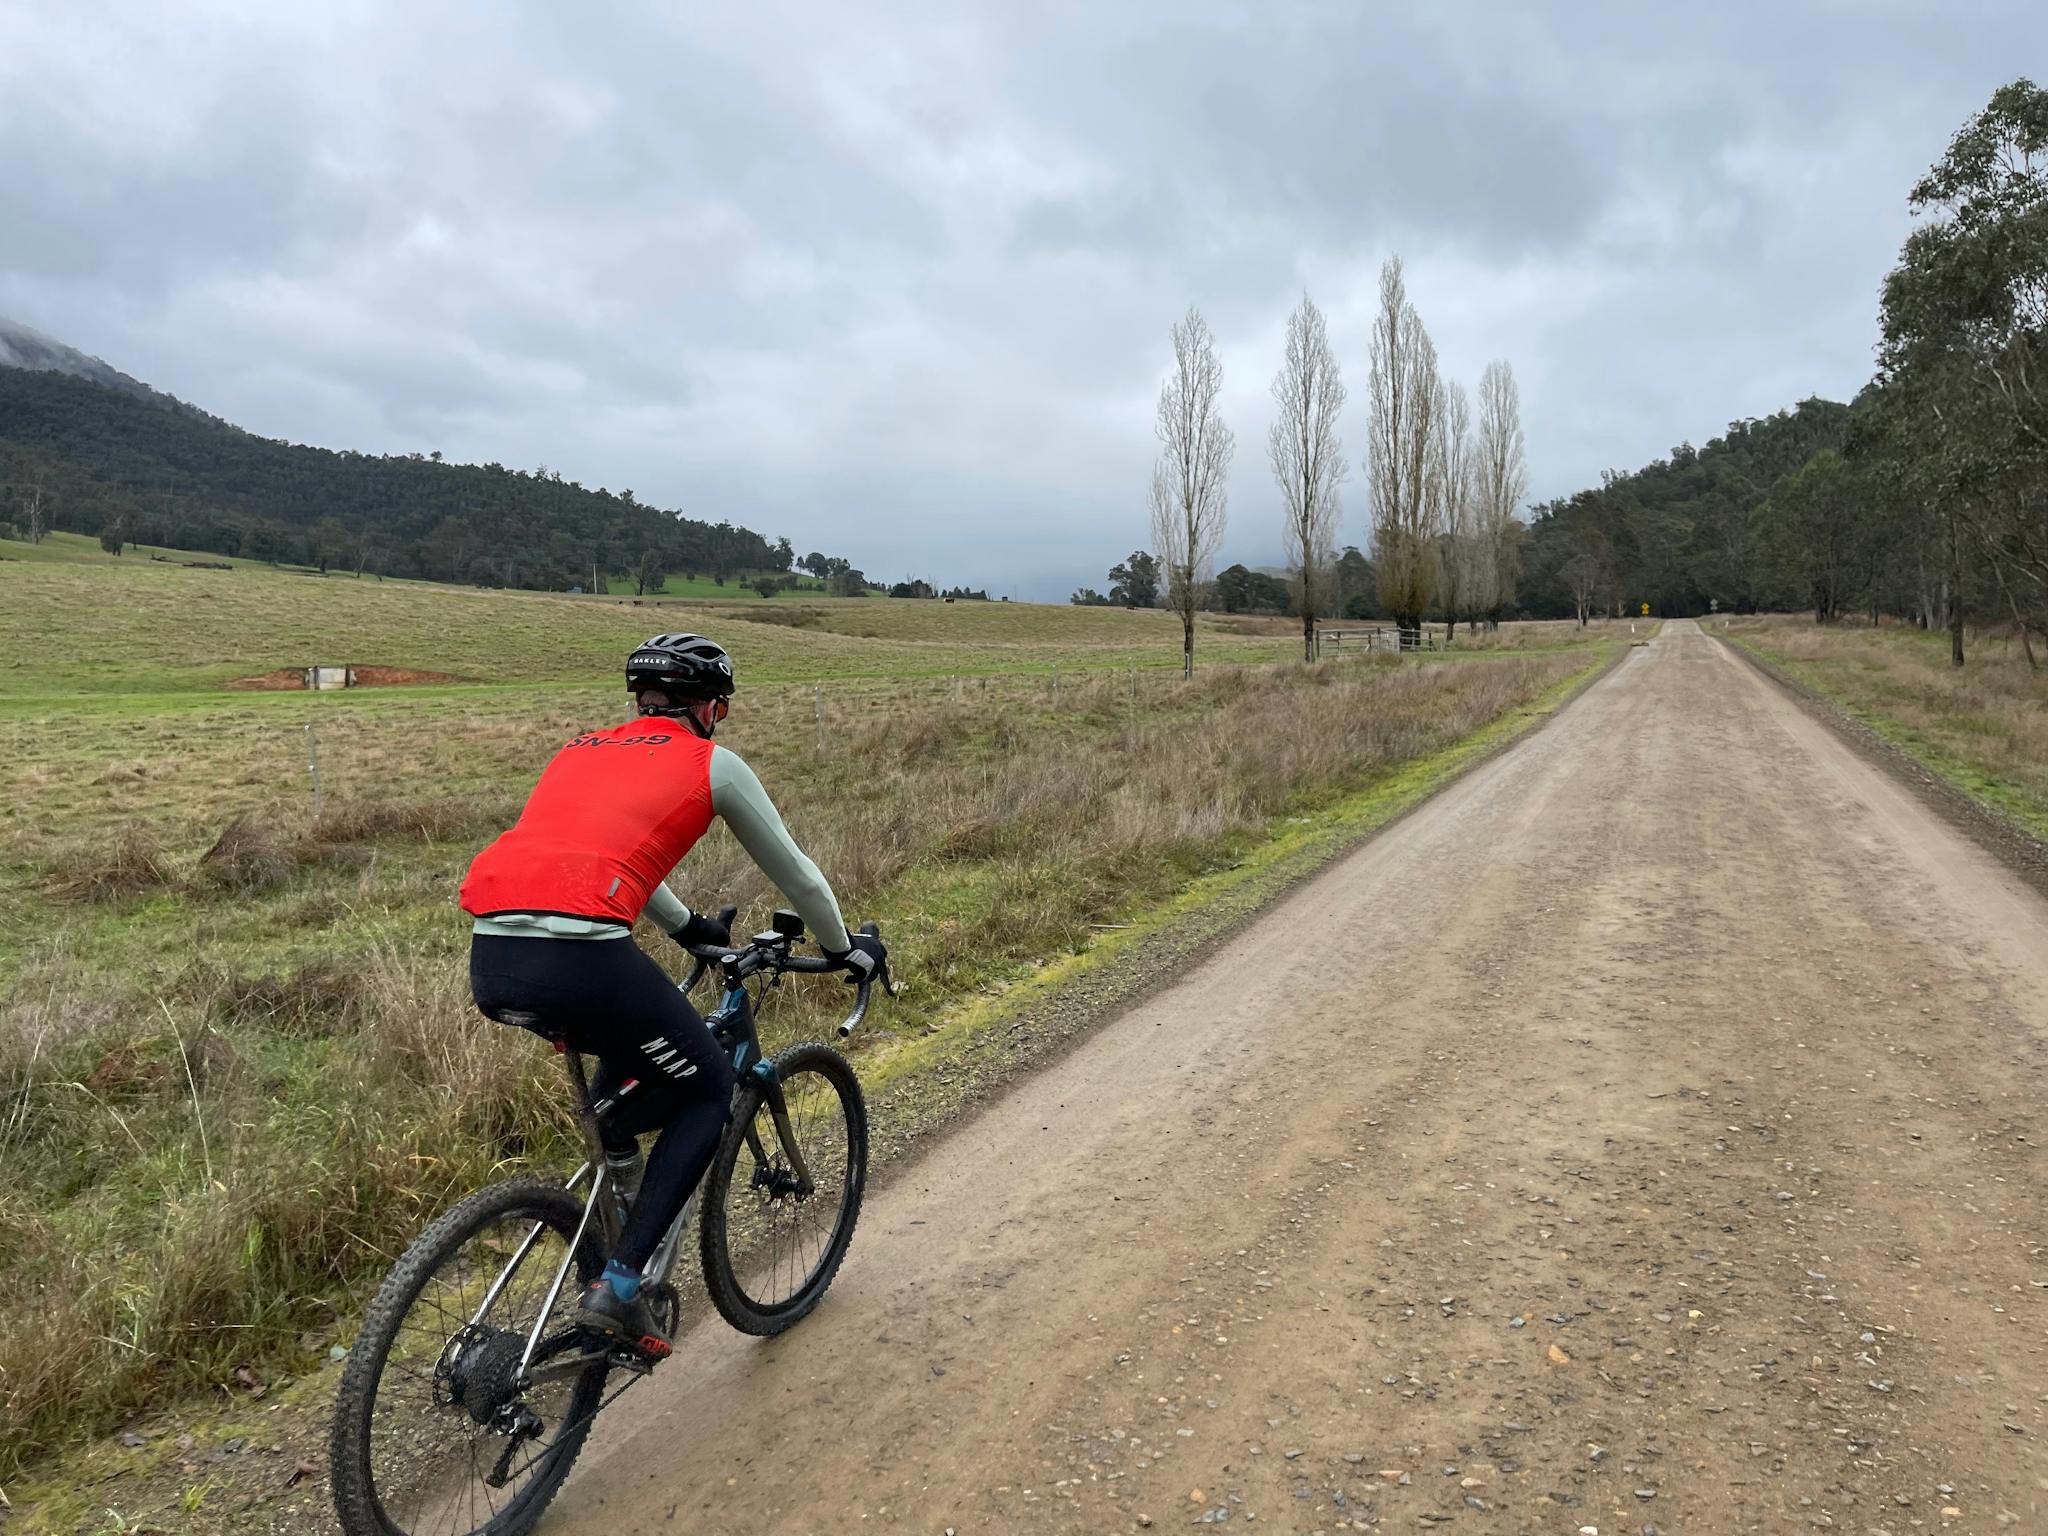 Cyclist with red vest on gravel road, farming country with poplar trees, hills with trees, grey sky